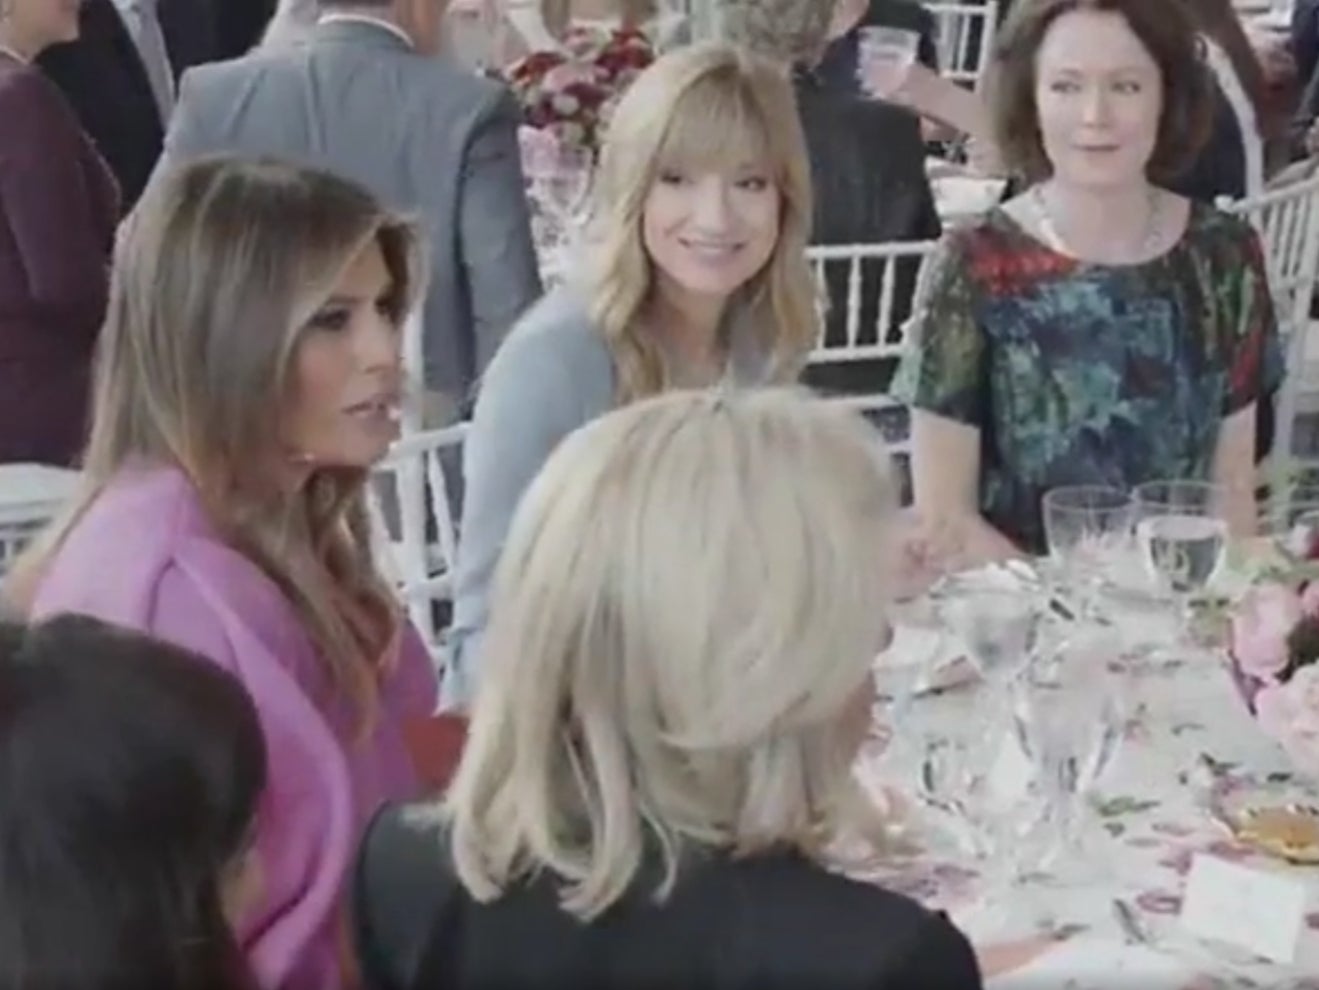 The video contains a weird, extended complaint about Melania Trump having lunch with friends